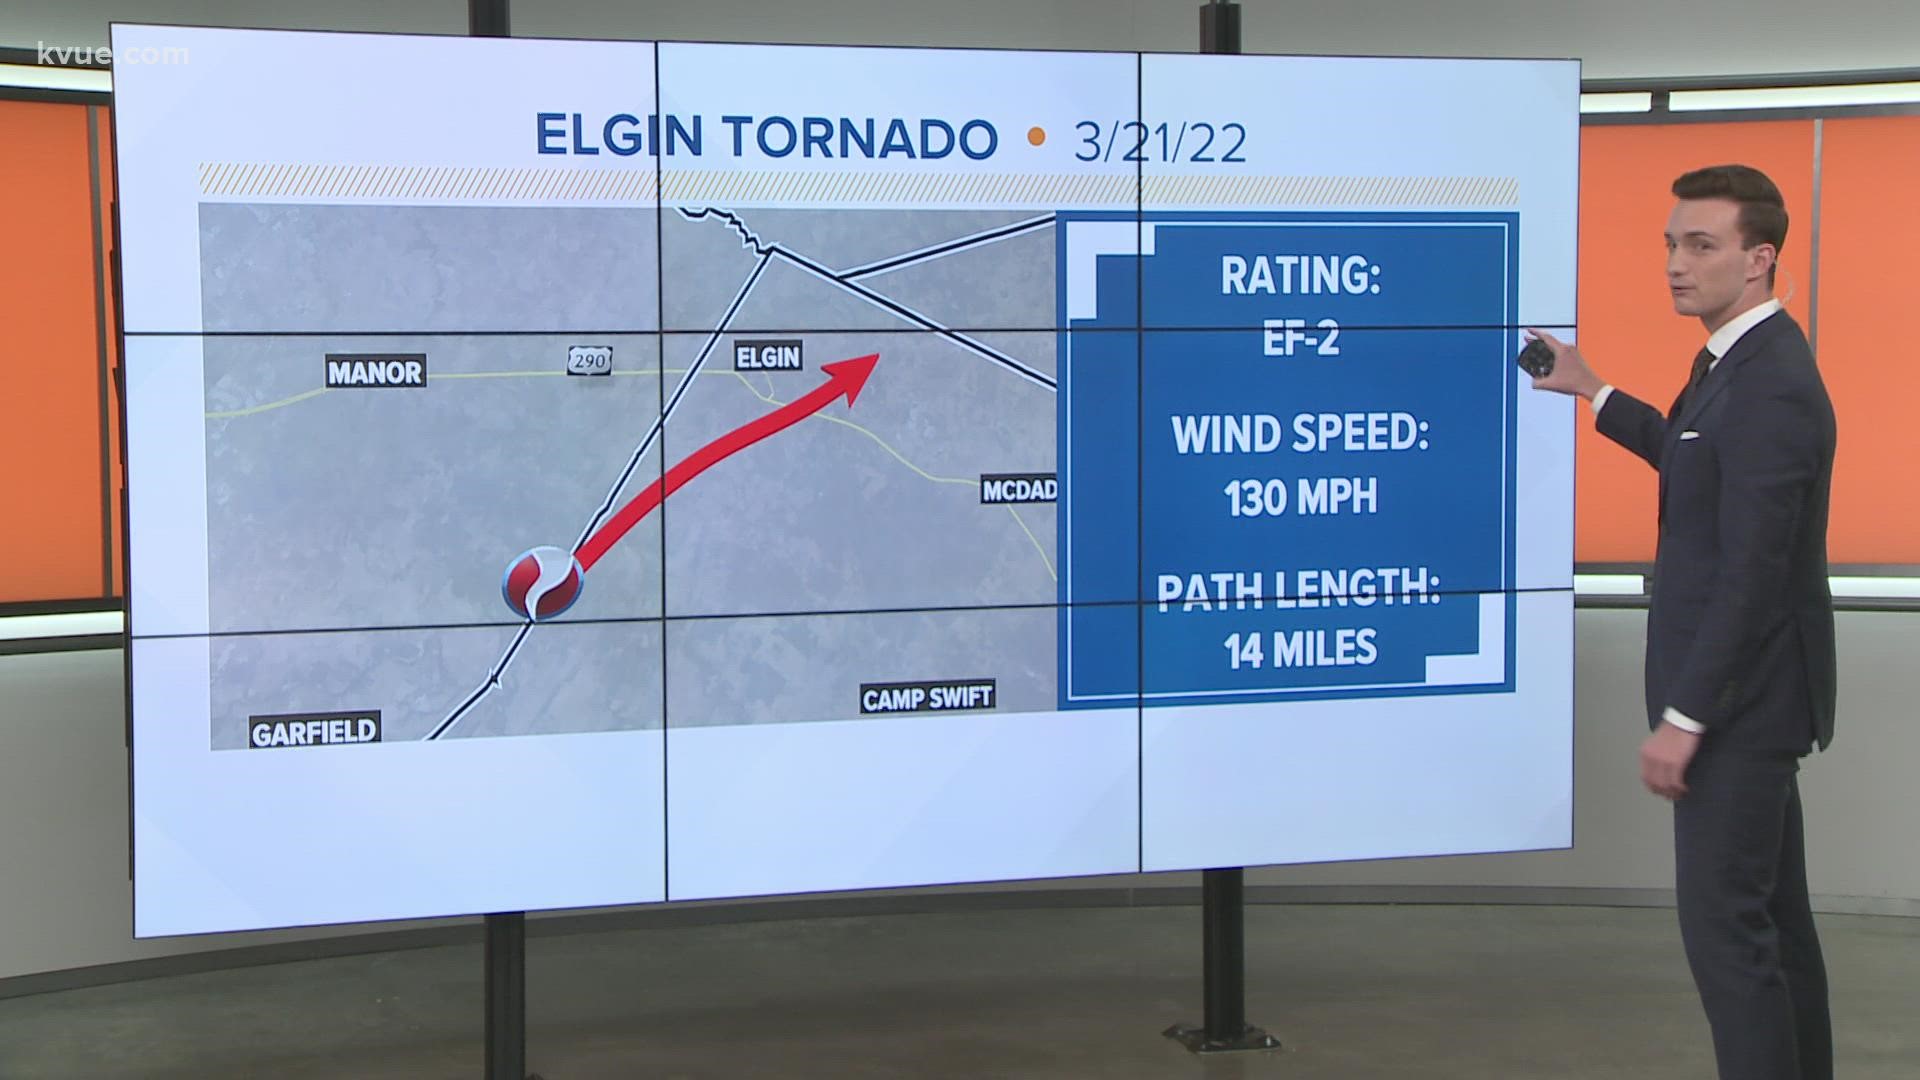 EF-2 tornadoes were confirmed in Round Rock and Elgin.